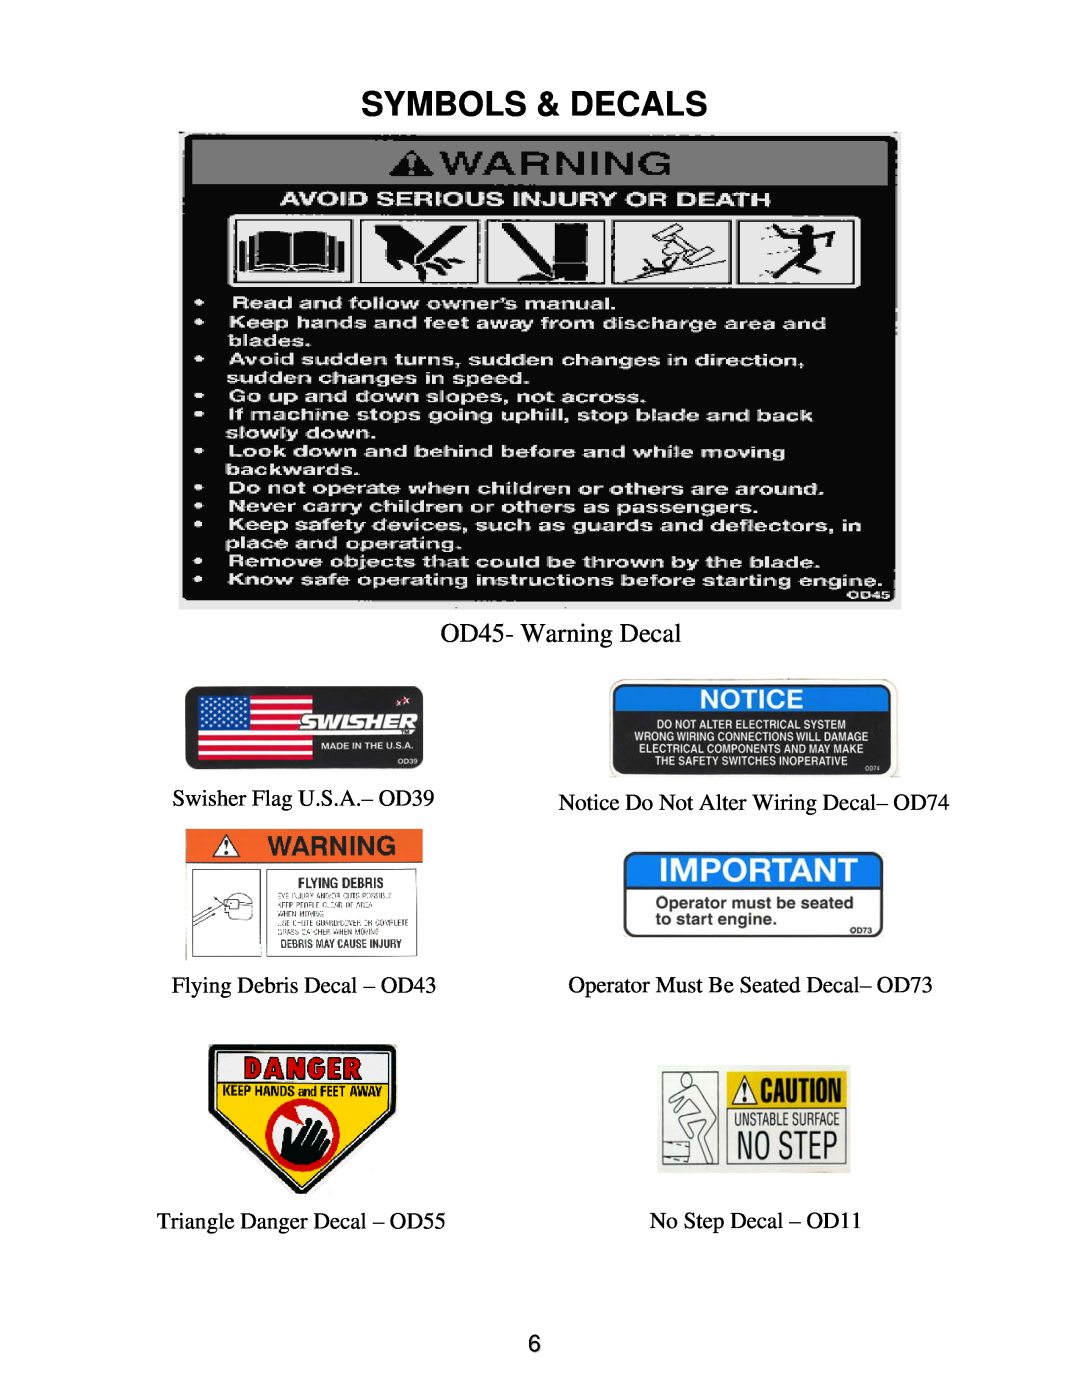 Swisher ZT2350A Symbols & Decals, OD45- Warning Decal, Swisher Flag U.S.A.- OD39, Notice Do Not Alter Wiring Decal- OD74 